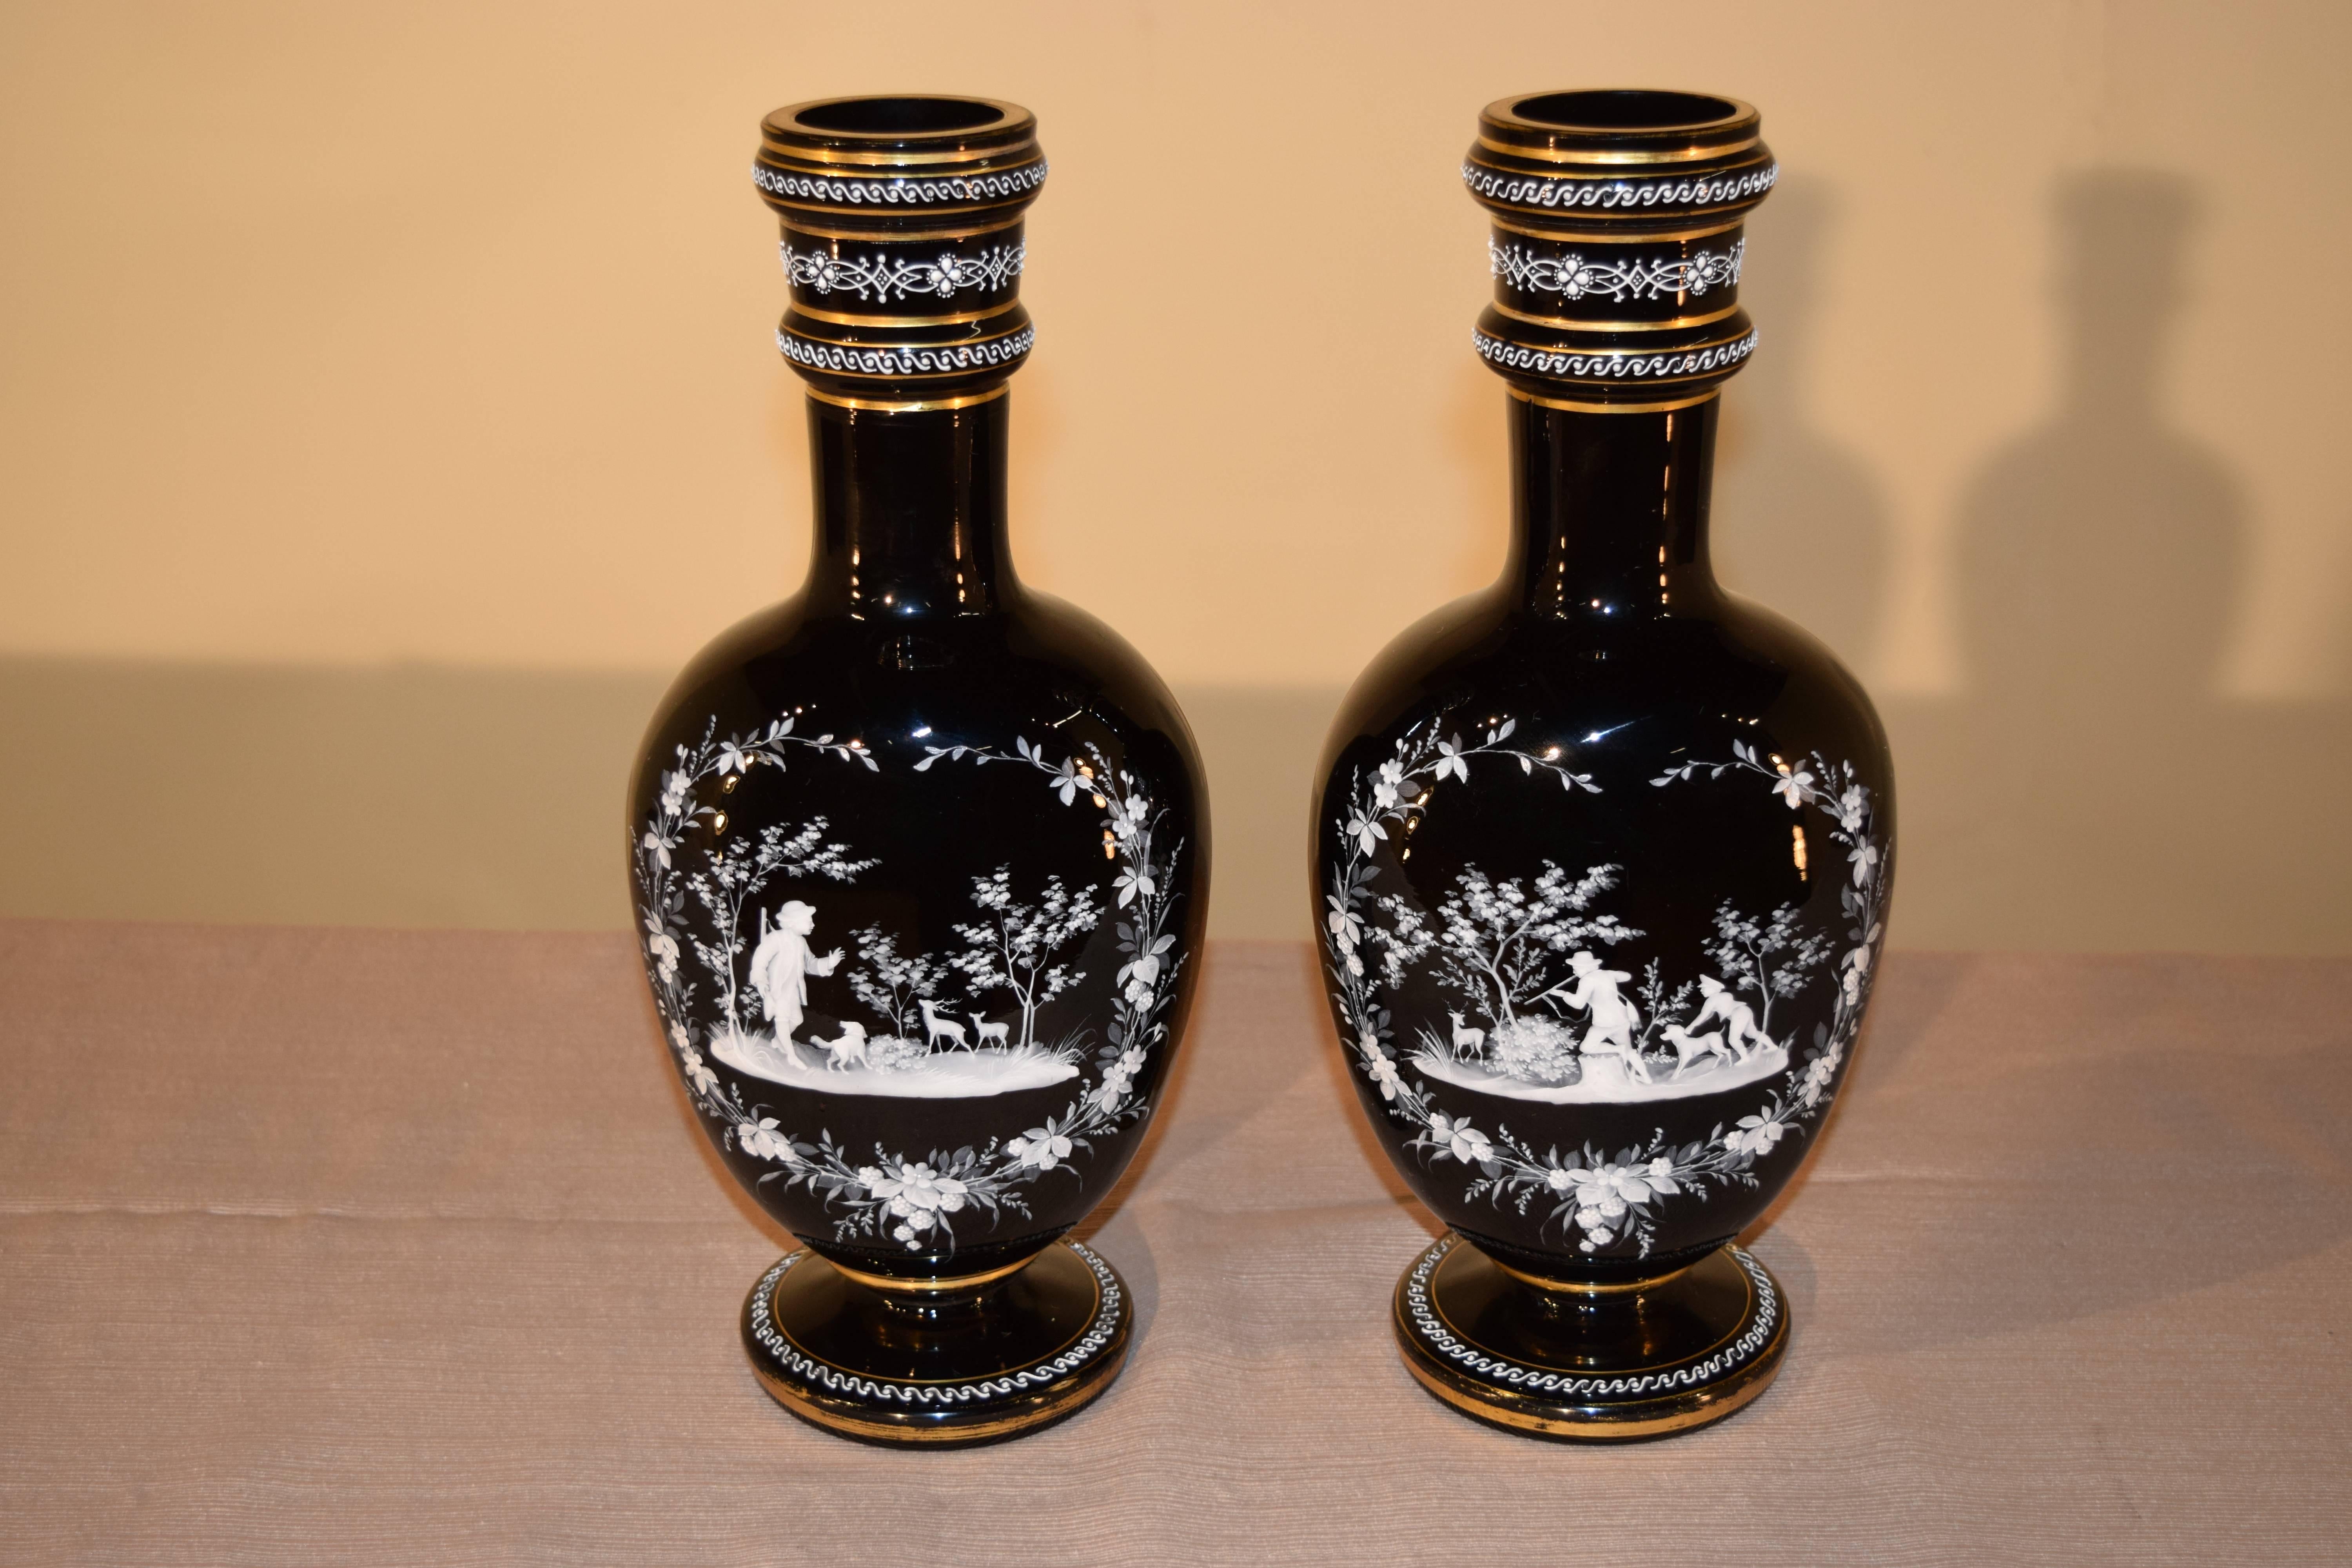 Pair of 19th century handblown amethyst glass vases with central designs on the front surrounded by a floral border and hand-painted scenes depicting children hunting with dogs and deer. The collars and bases of the vases have hand-painted enamel